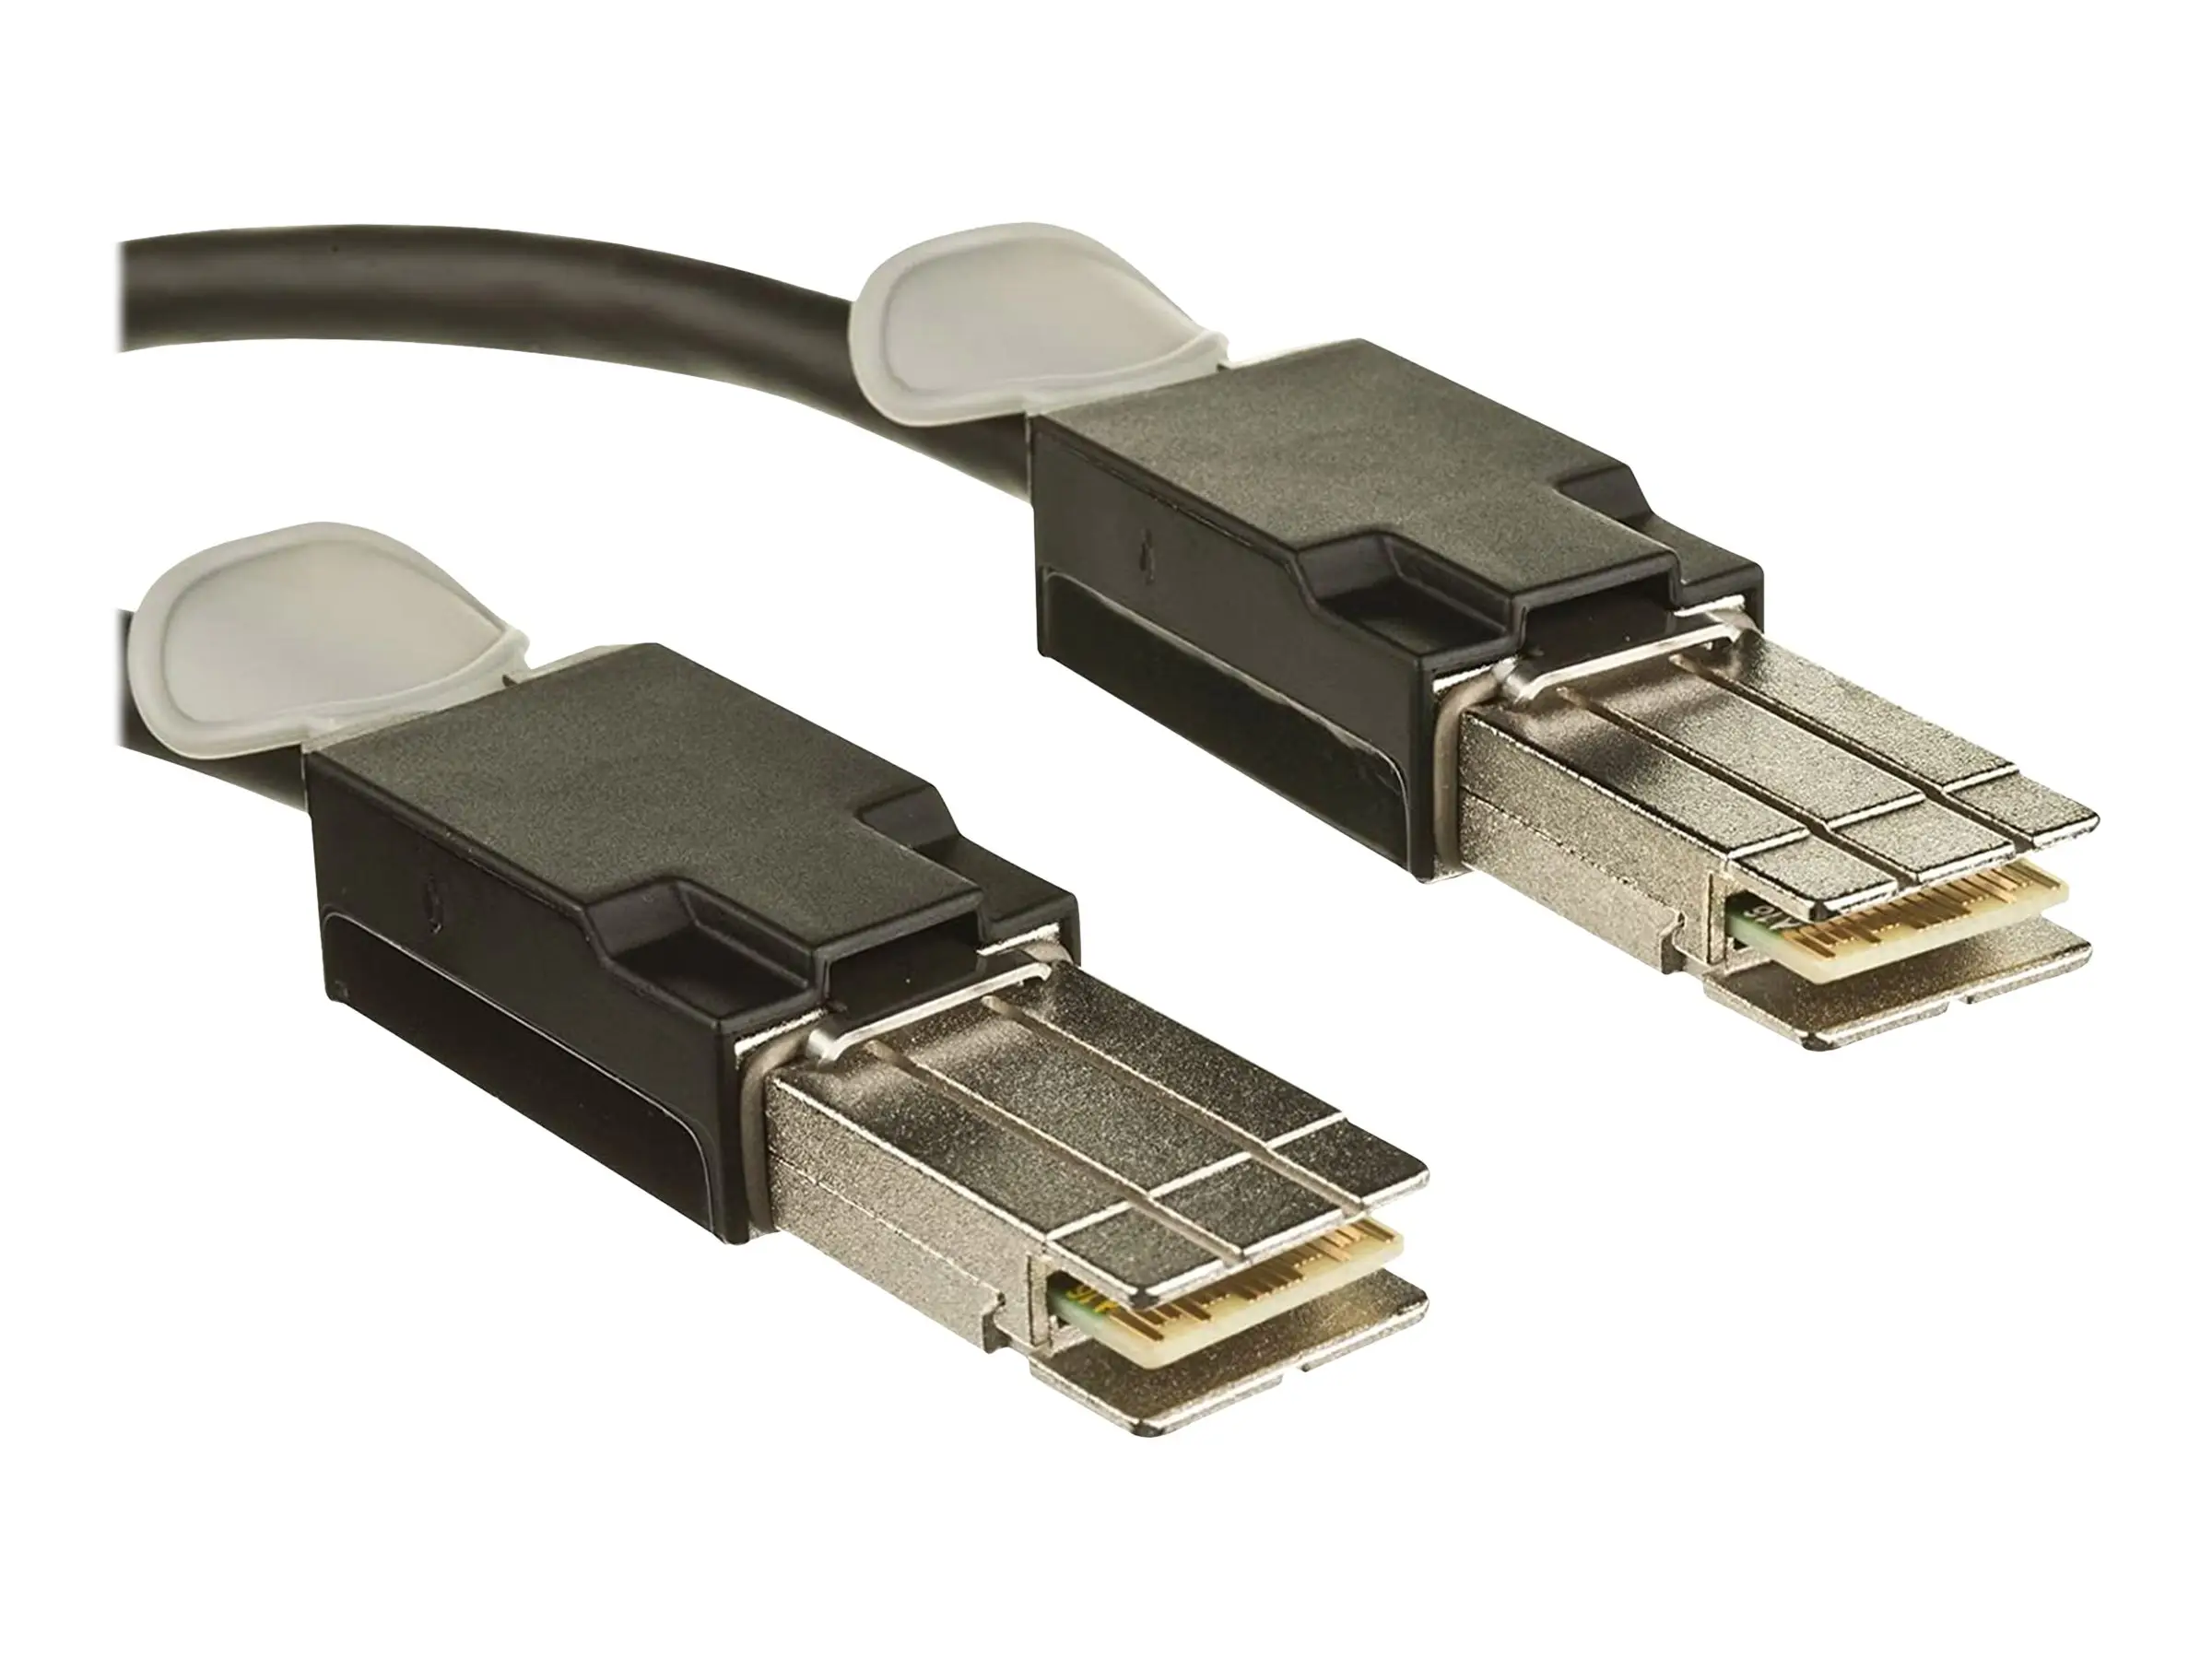 Cisco CAB-STK-E-3M - Stacking Cable